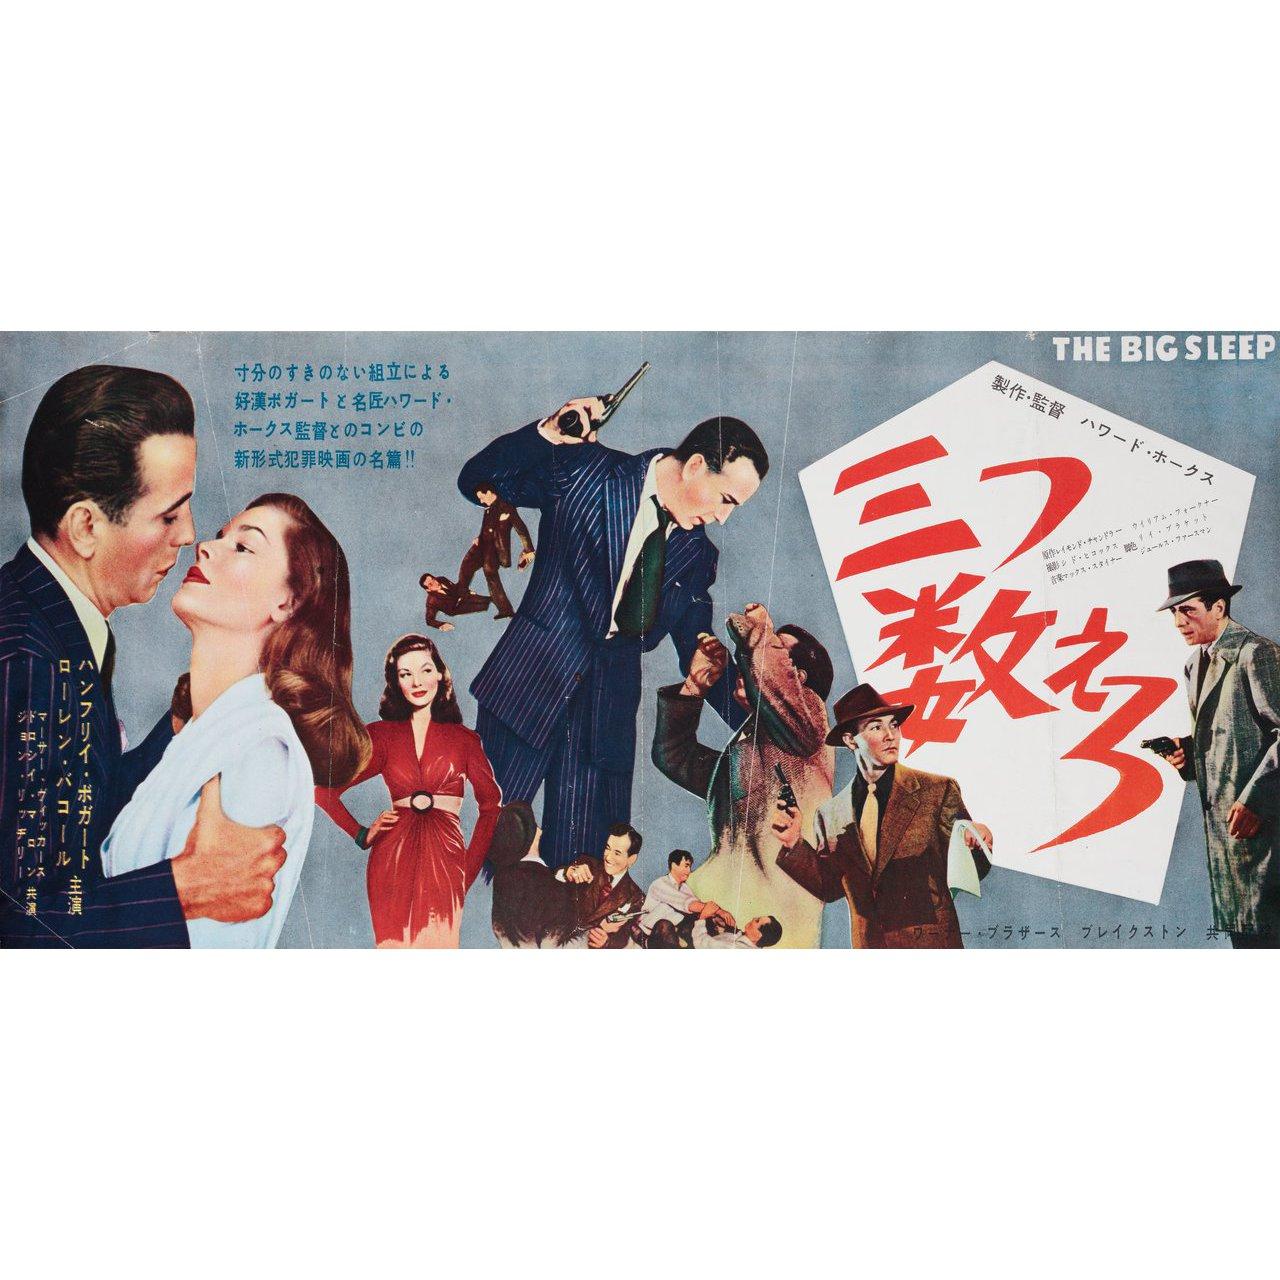 Original 1955 Japanese press poster for the first Japanese theatrical release of the 1946 film The Big Sleep directed by Howard Hawks with Humphrey Bogart / Lauren Bacall / John Ridgely / Martha Vickers. Very Good-Fine condition, folded. Many